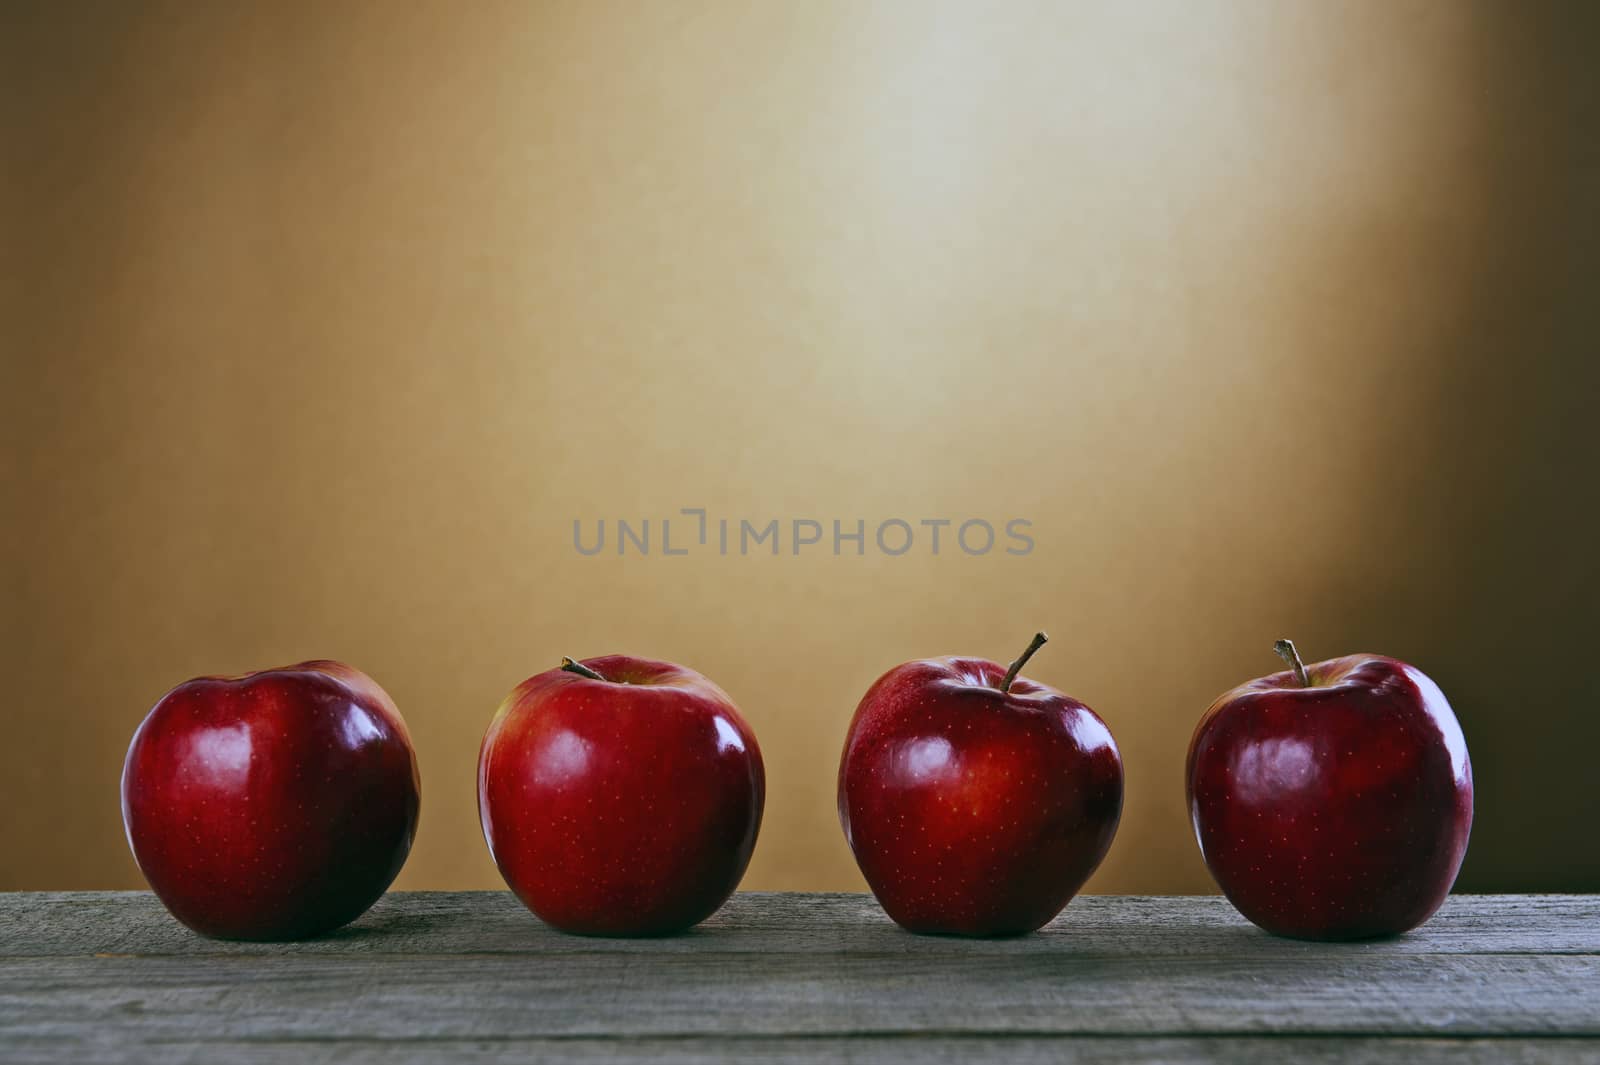 Red apples on a wooden table by Michalowski